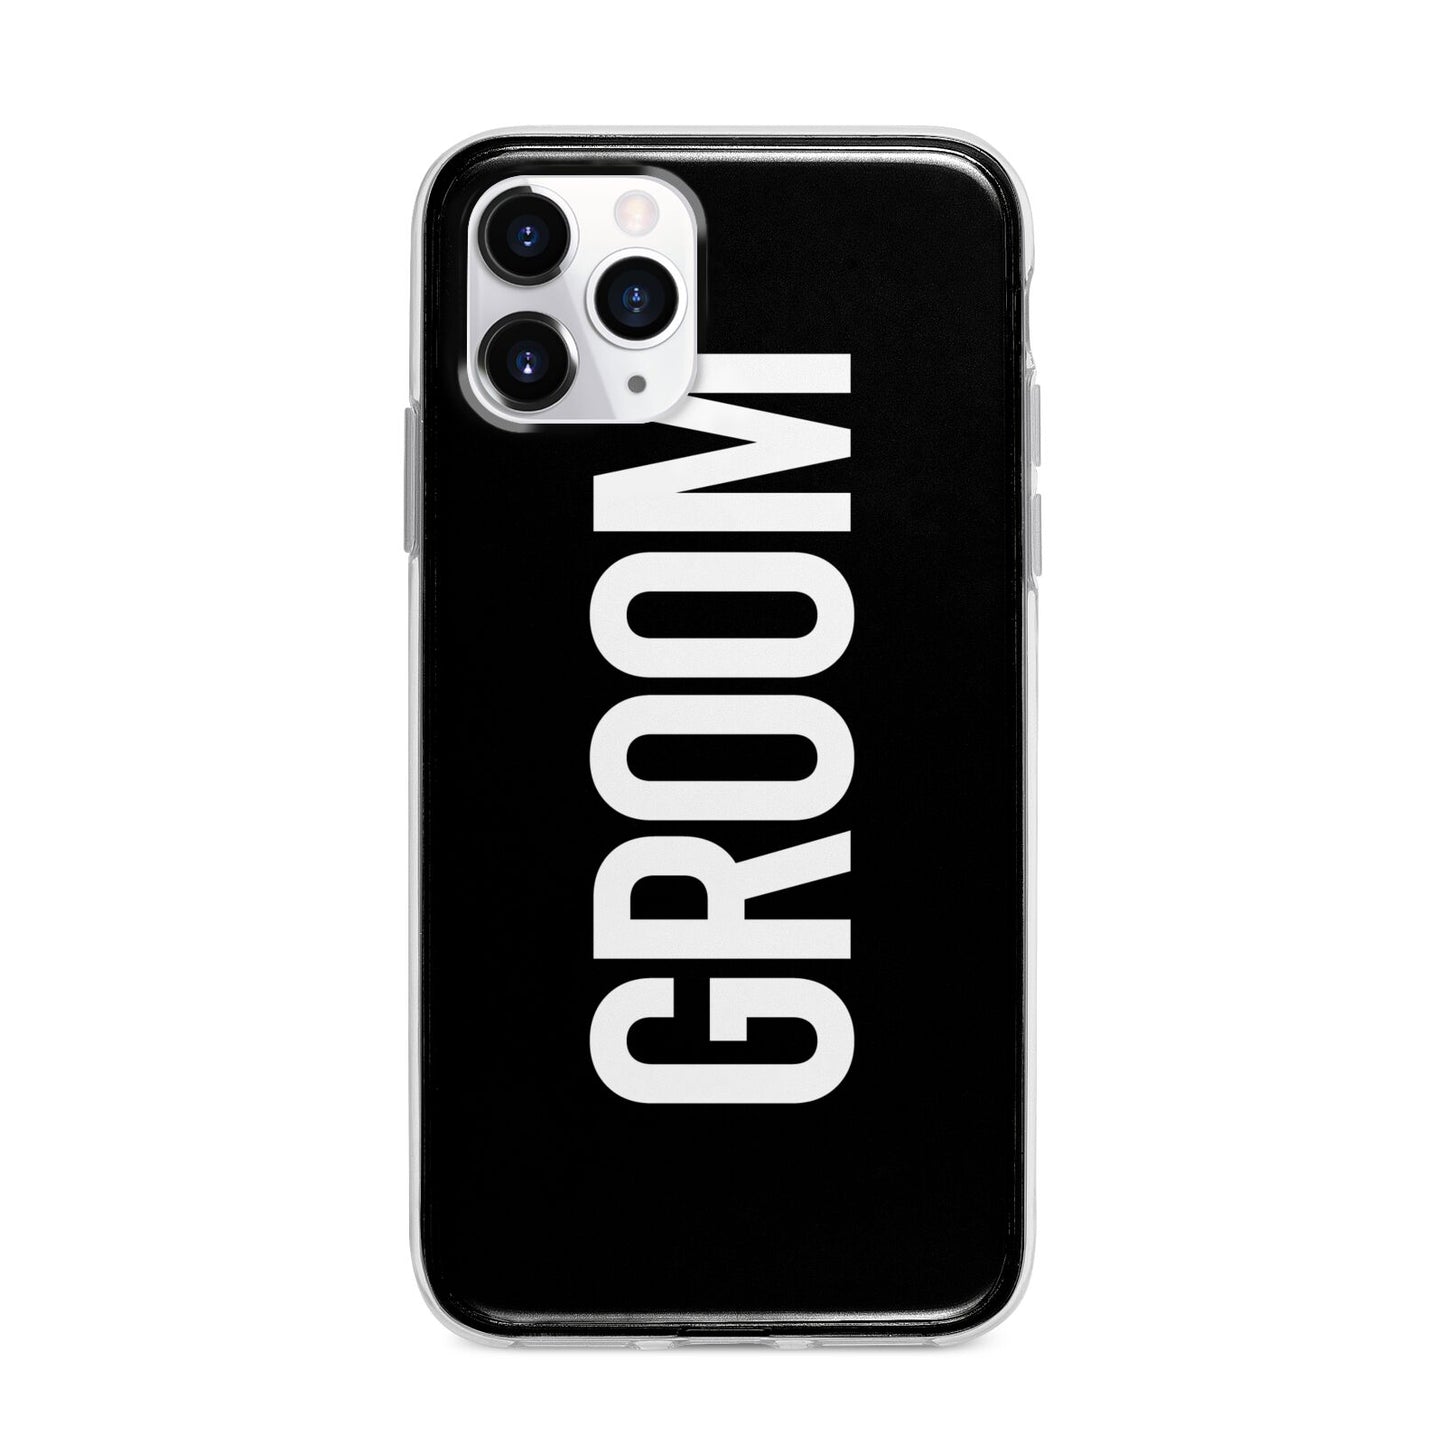 Groom Apple iPhone 11 Pro in Silver with Bumper Case